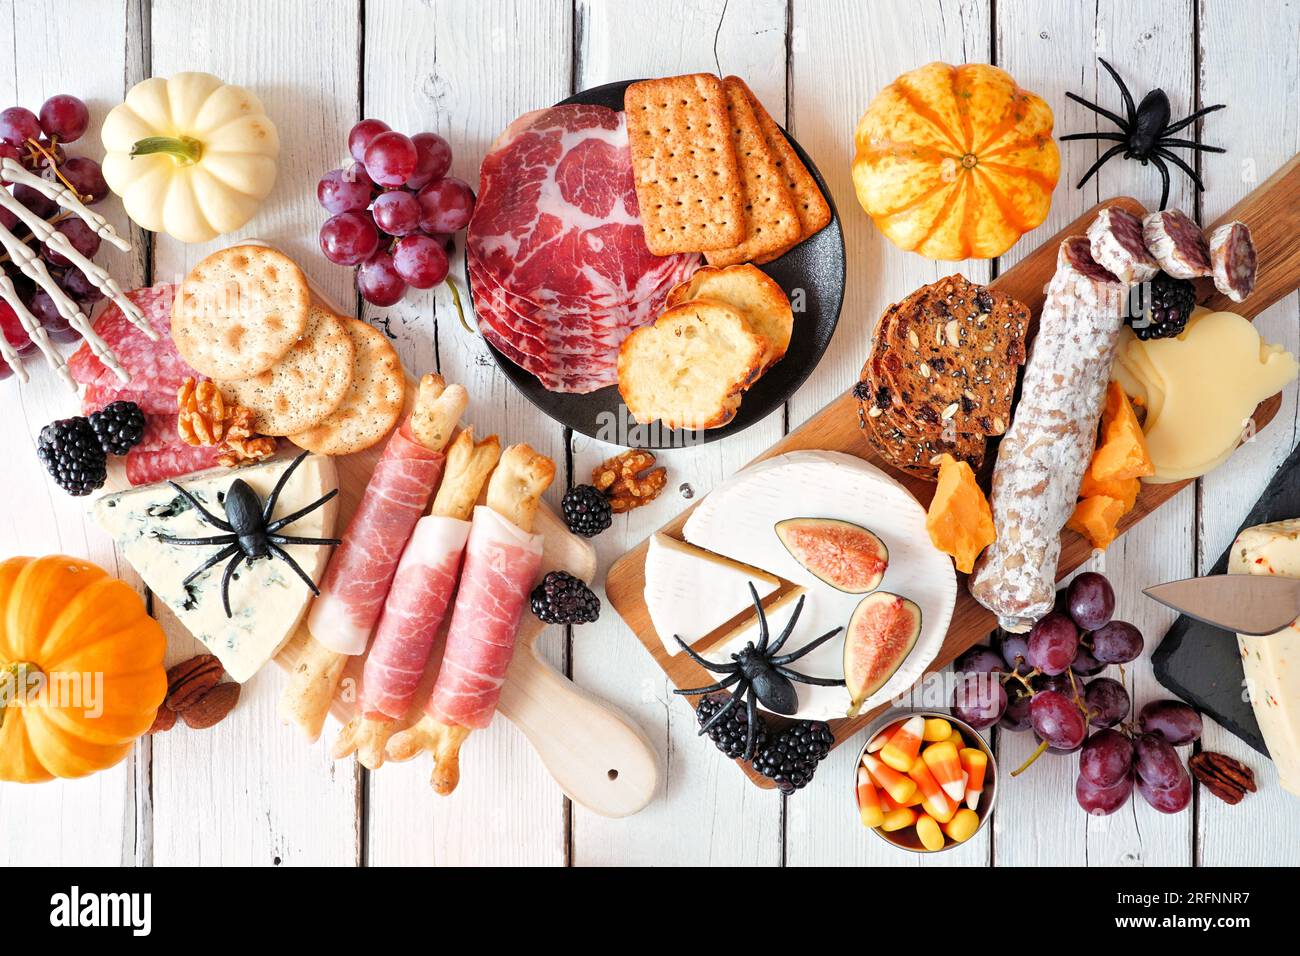 Halloween charcuterie table scene against a white wood background. Selection of cheese and meat appetizers. Top view. Stock Photo